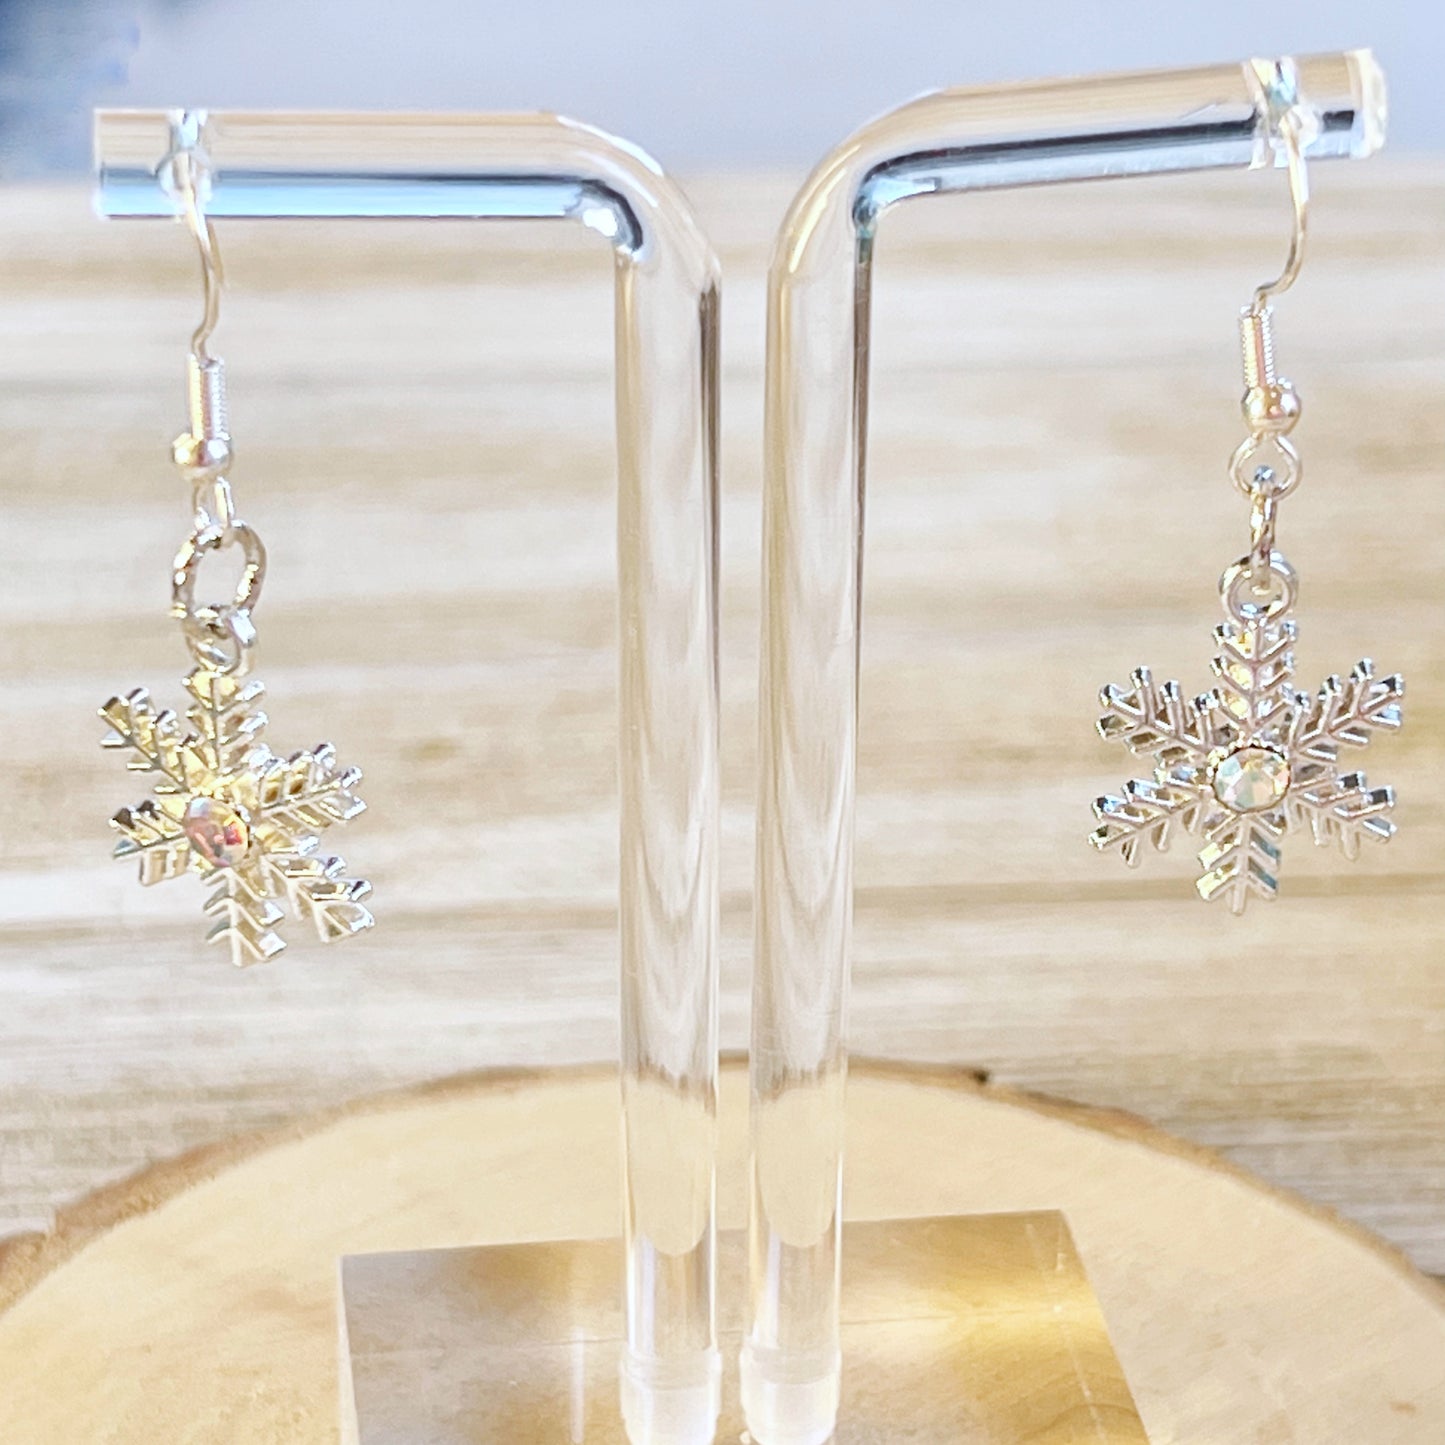 Silver Snowflake Dangle Earrings: Sparkling Rhinestone Accents for Winter Charm